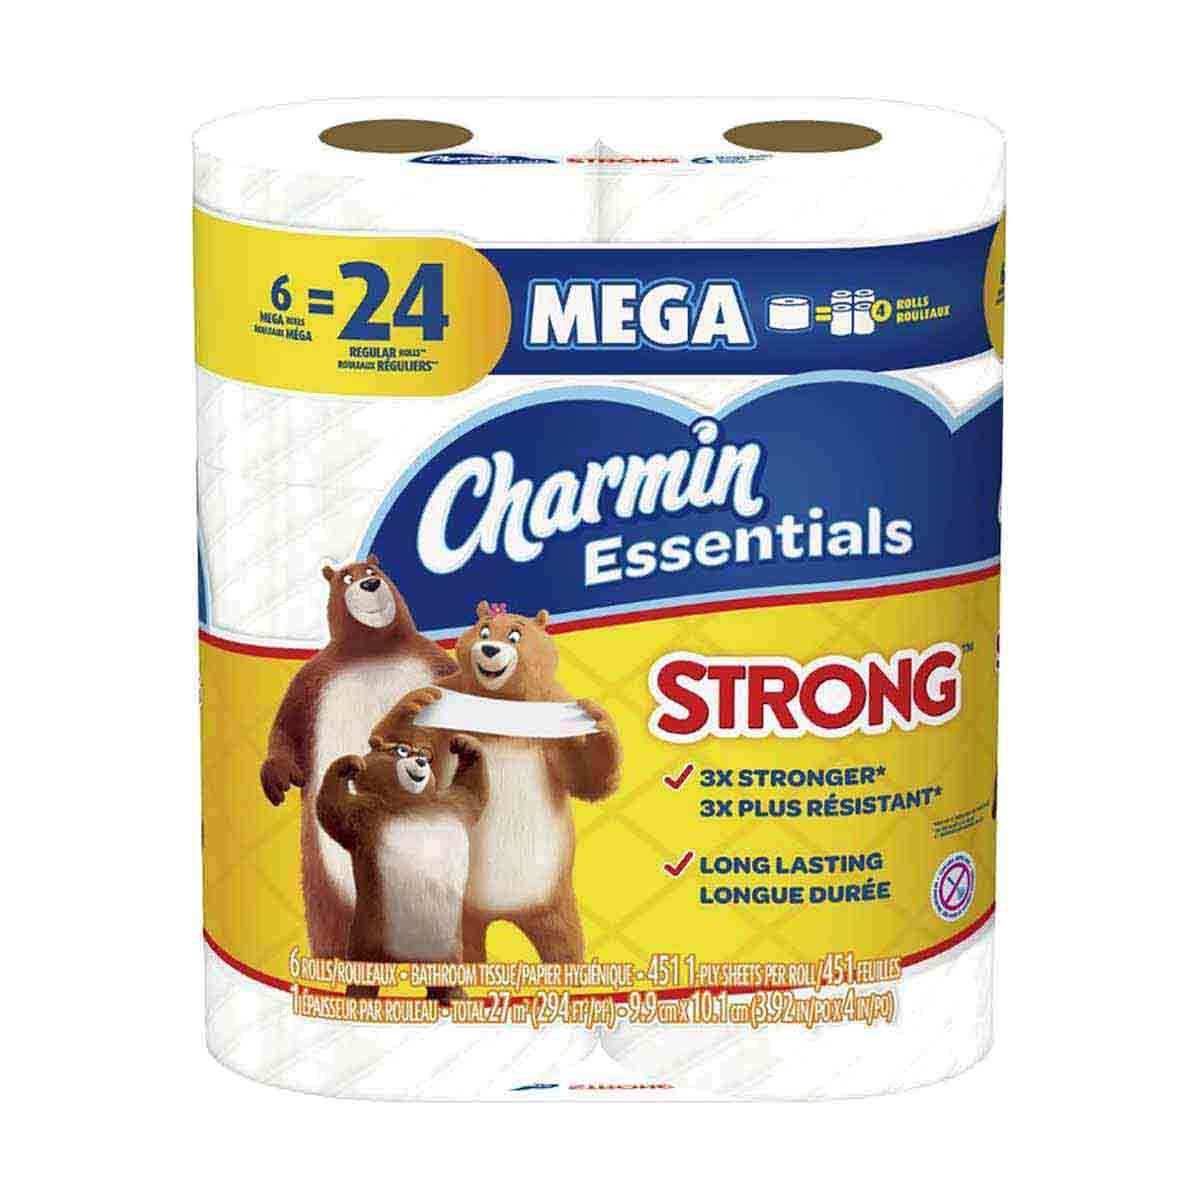 Charmin Essentials Strong Toilet Paper 6 Mega Rolls, 451 sheets per roll on Sale At Dollar General